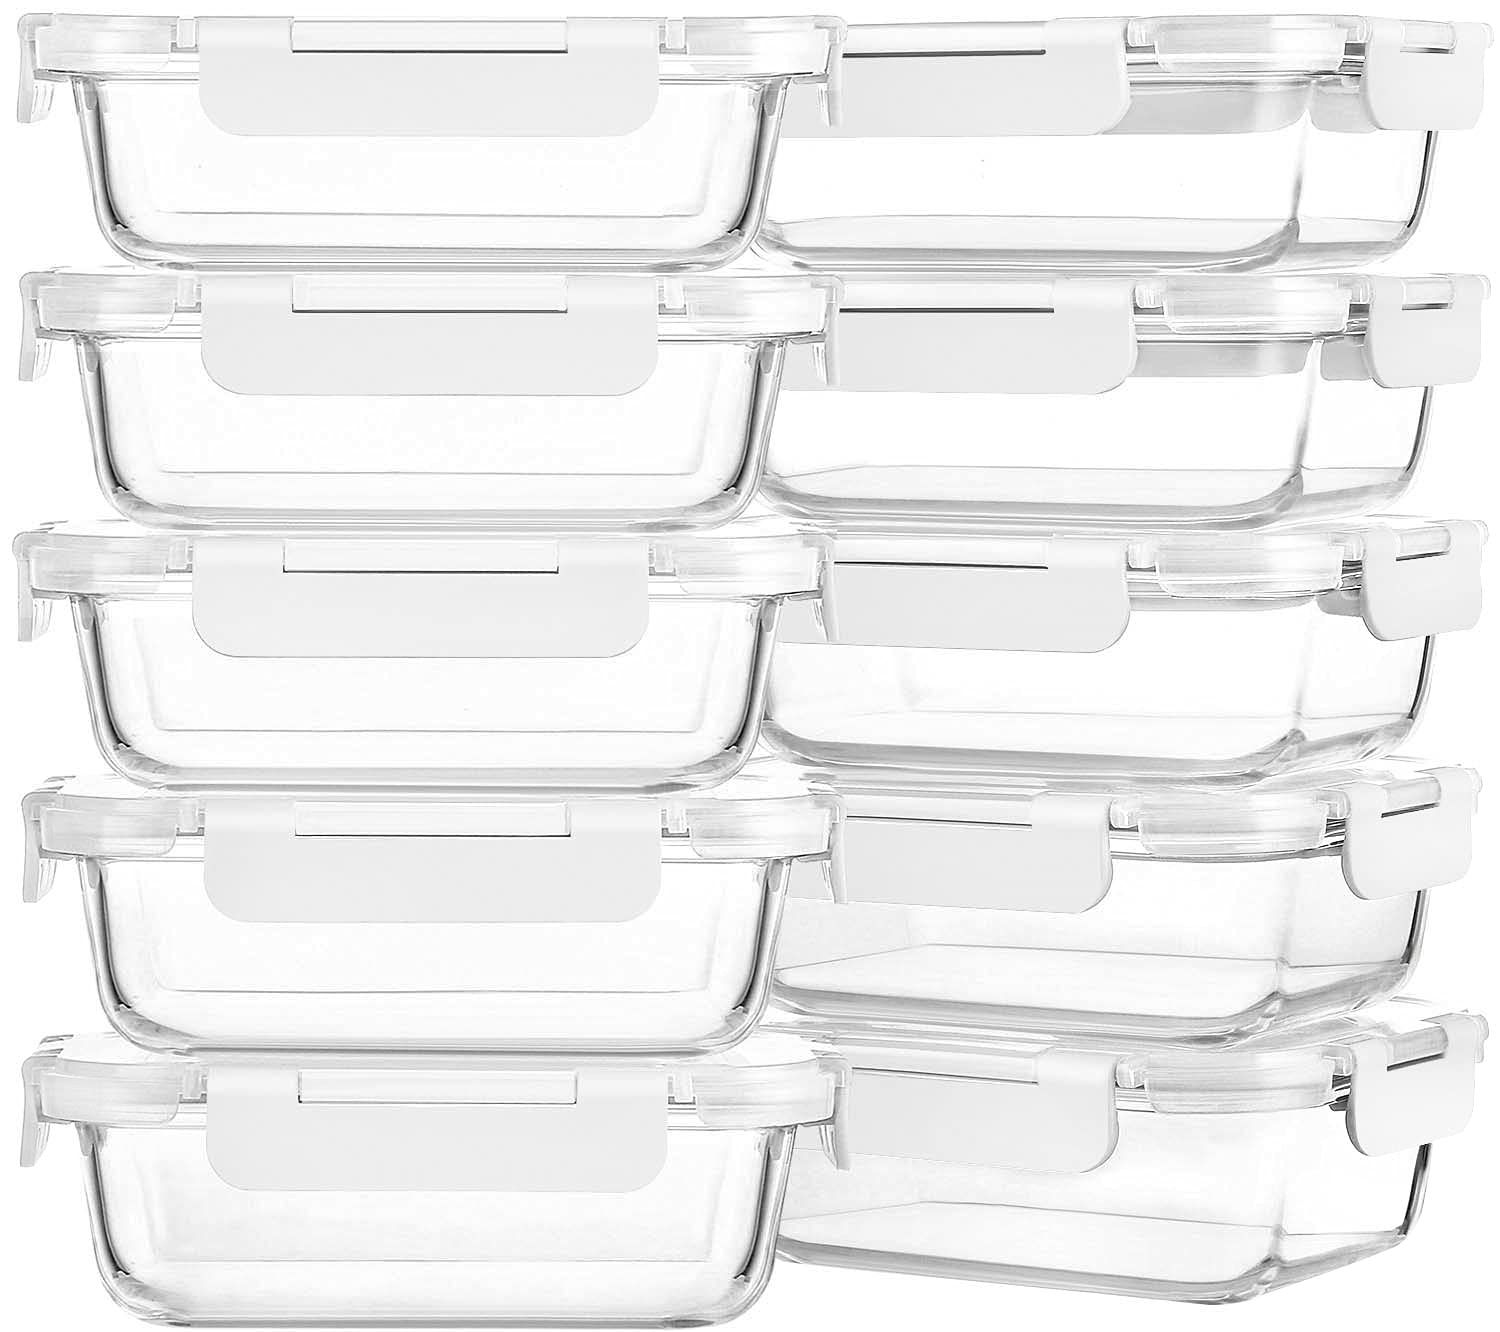 M MCIRCO [10-Pack,22 Oz Glass Meal Prep Containers,Glass Food Storage Containers with lids,Glass ... | Amazon (US)